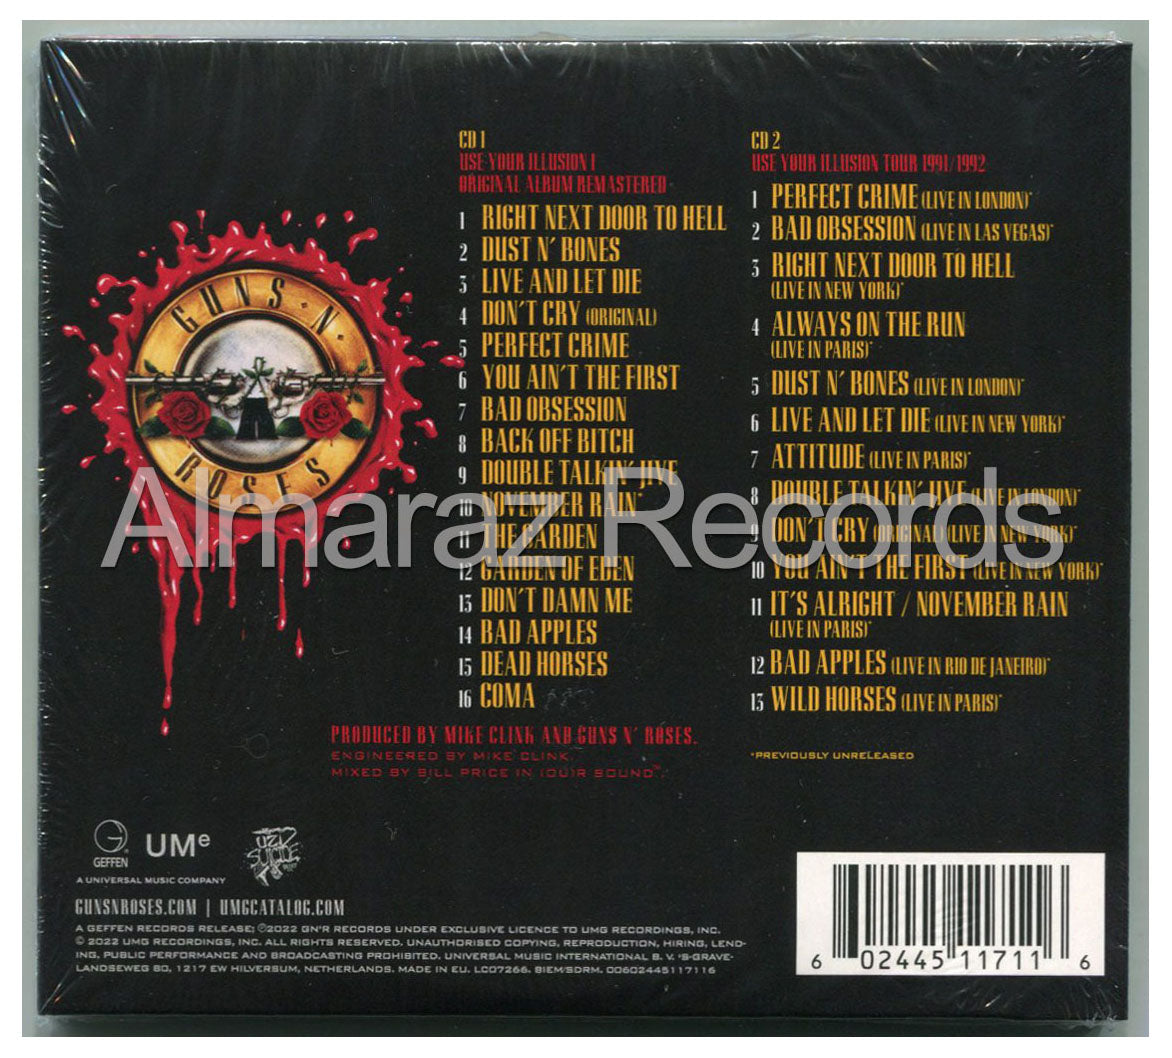 Guns N' Roses Use Your Illusion I Deluxe 2CD [2022][Importado]